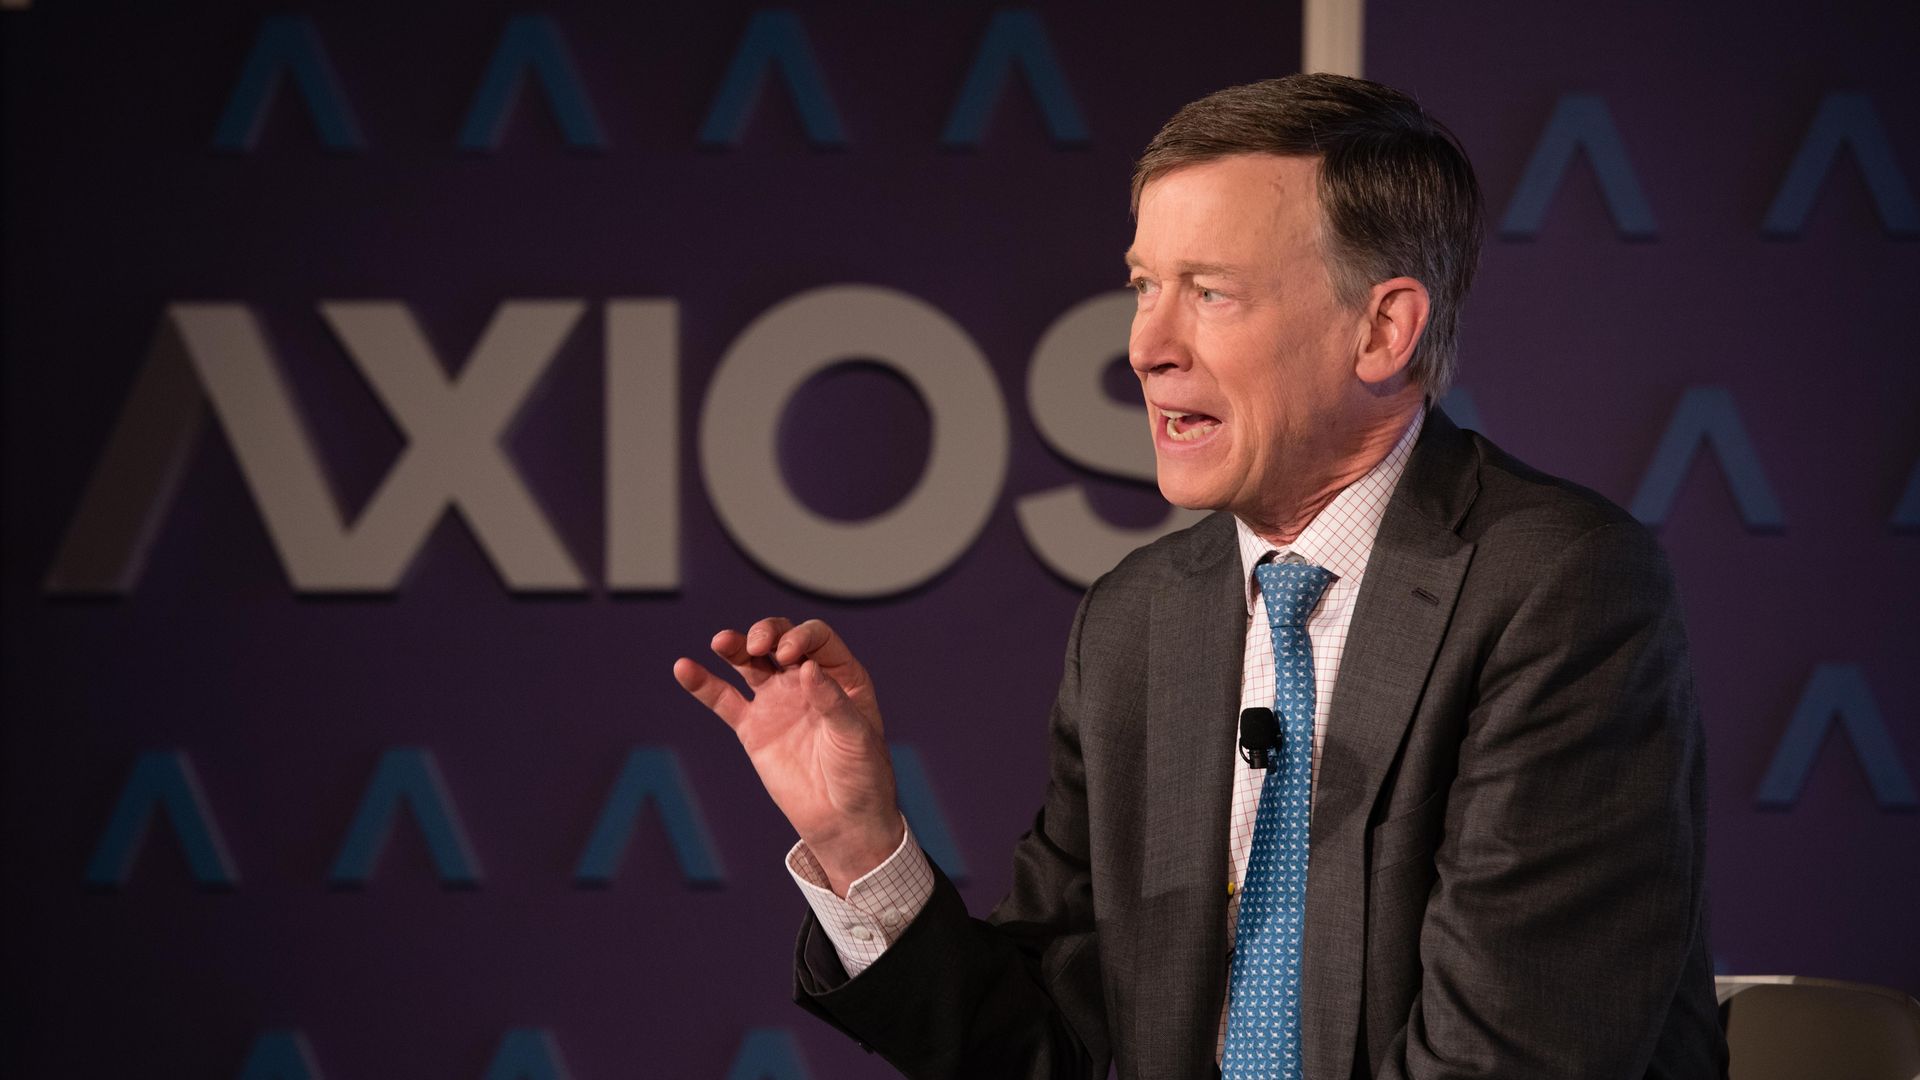 John Kasich speaks at Friday's Axios event